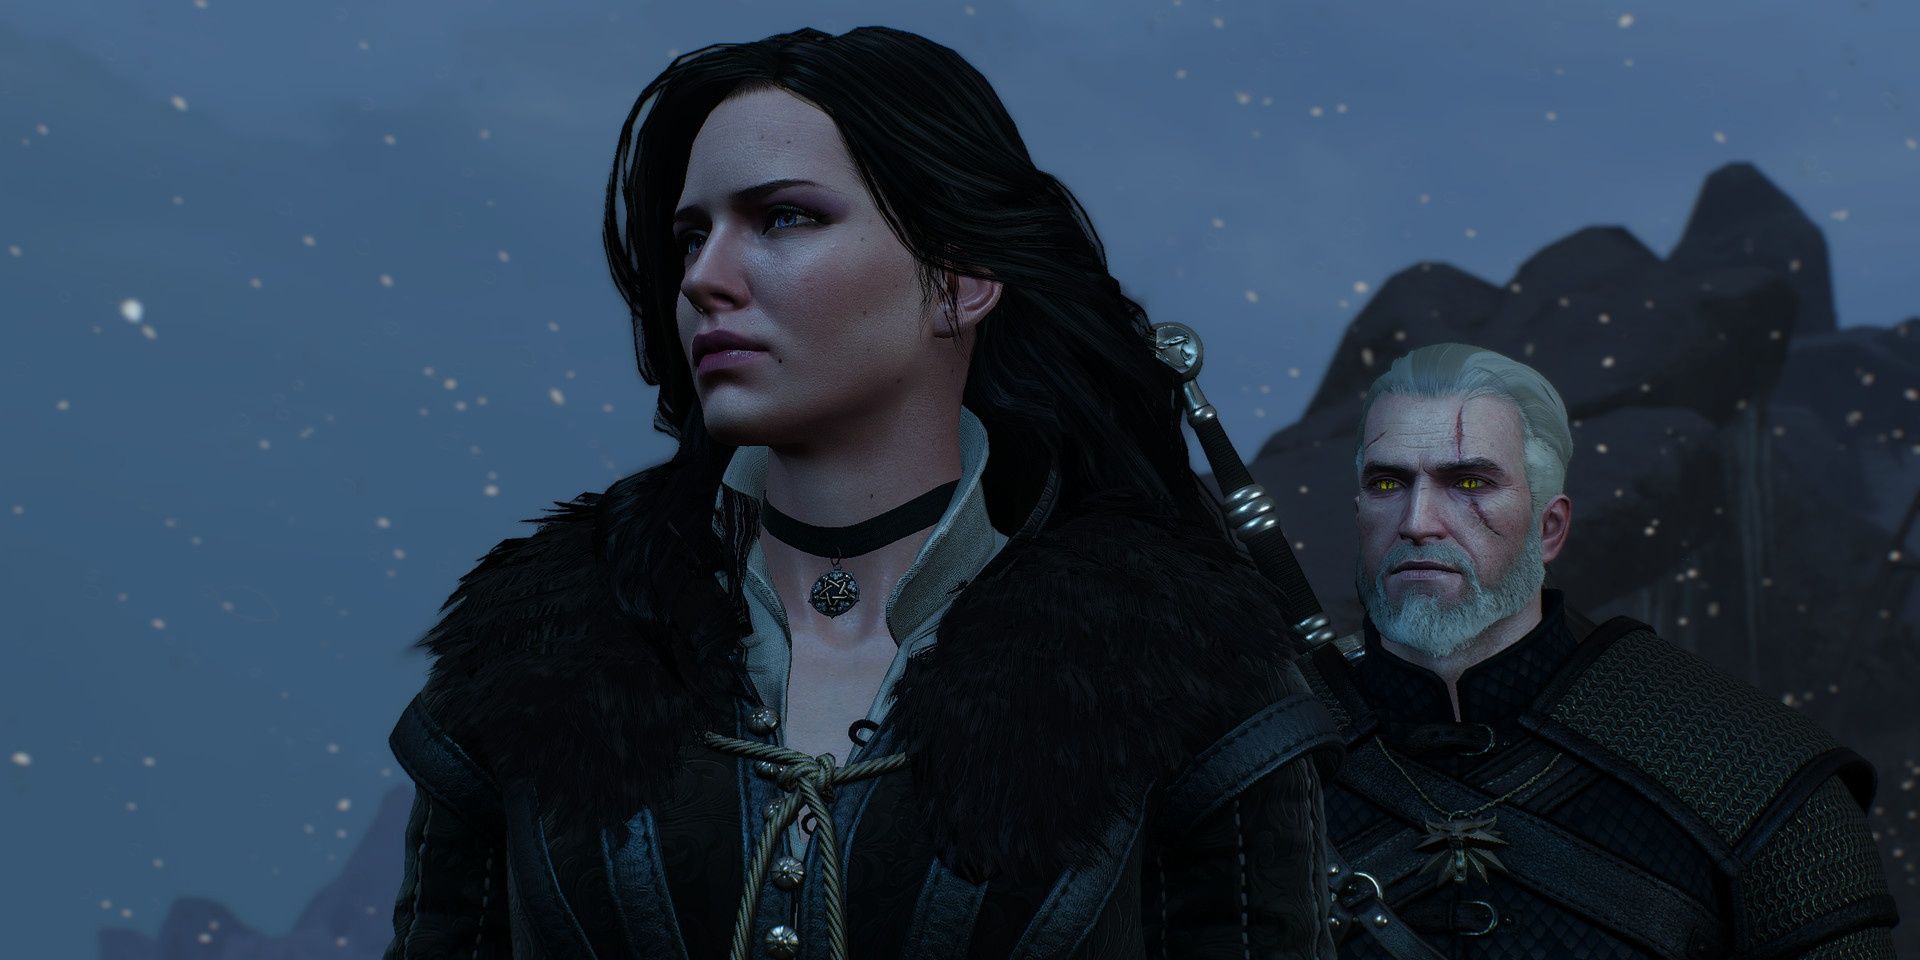 Yennefer and Geralt in The Witcher 3: Wild Hunt